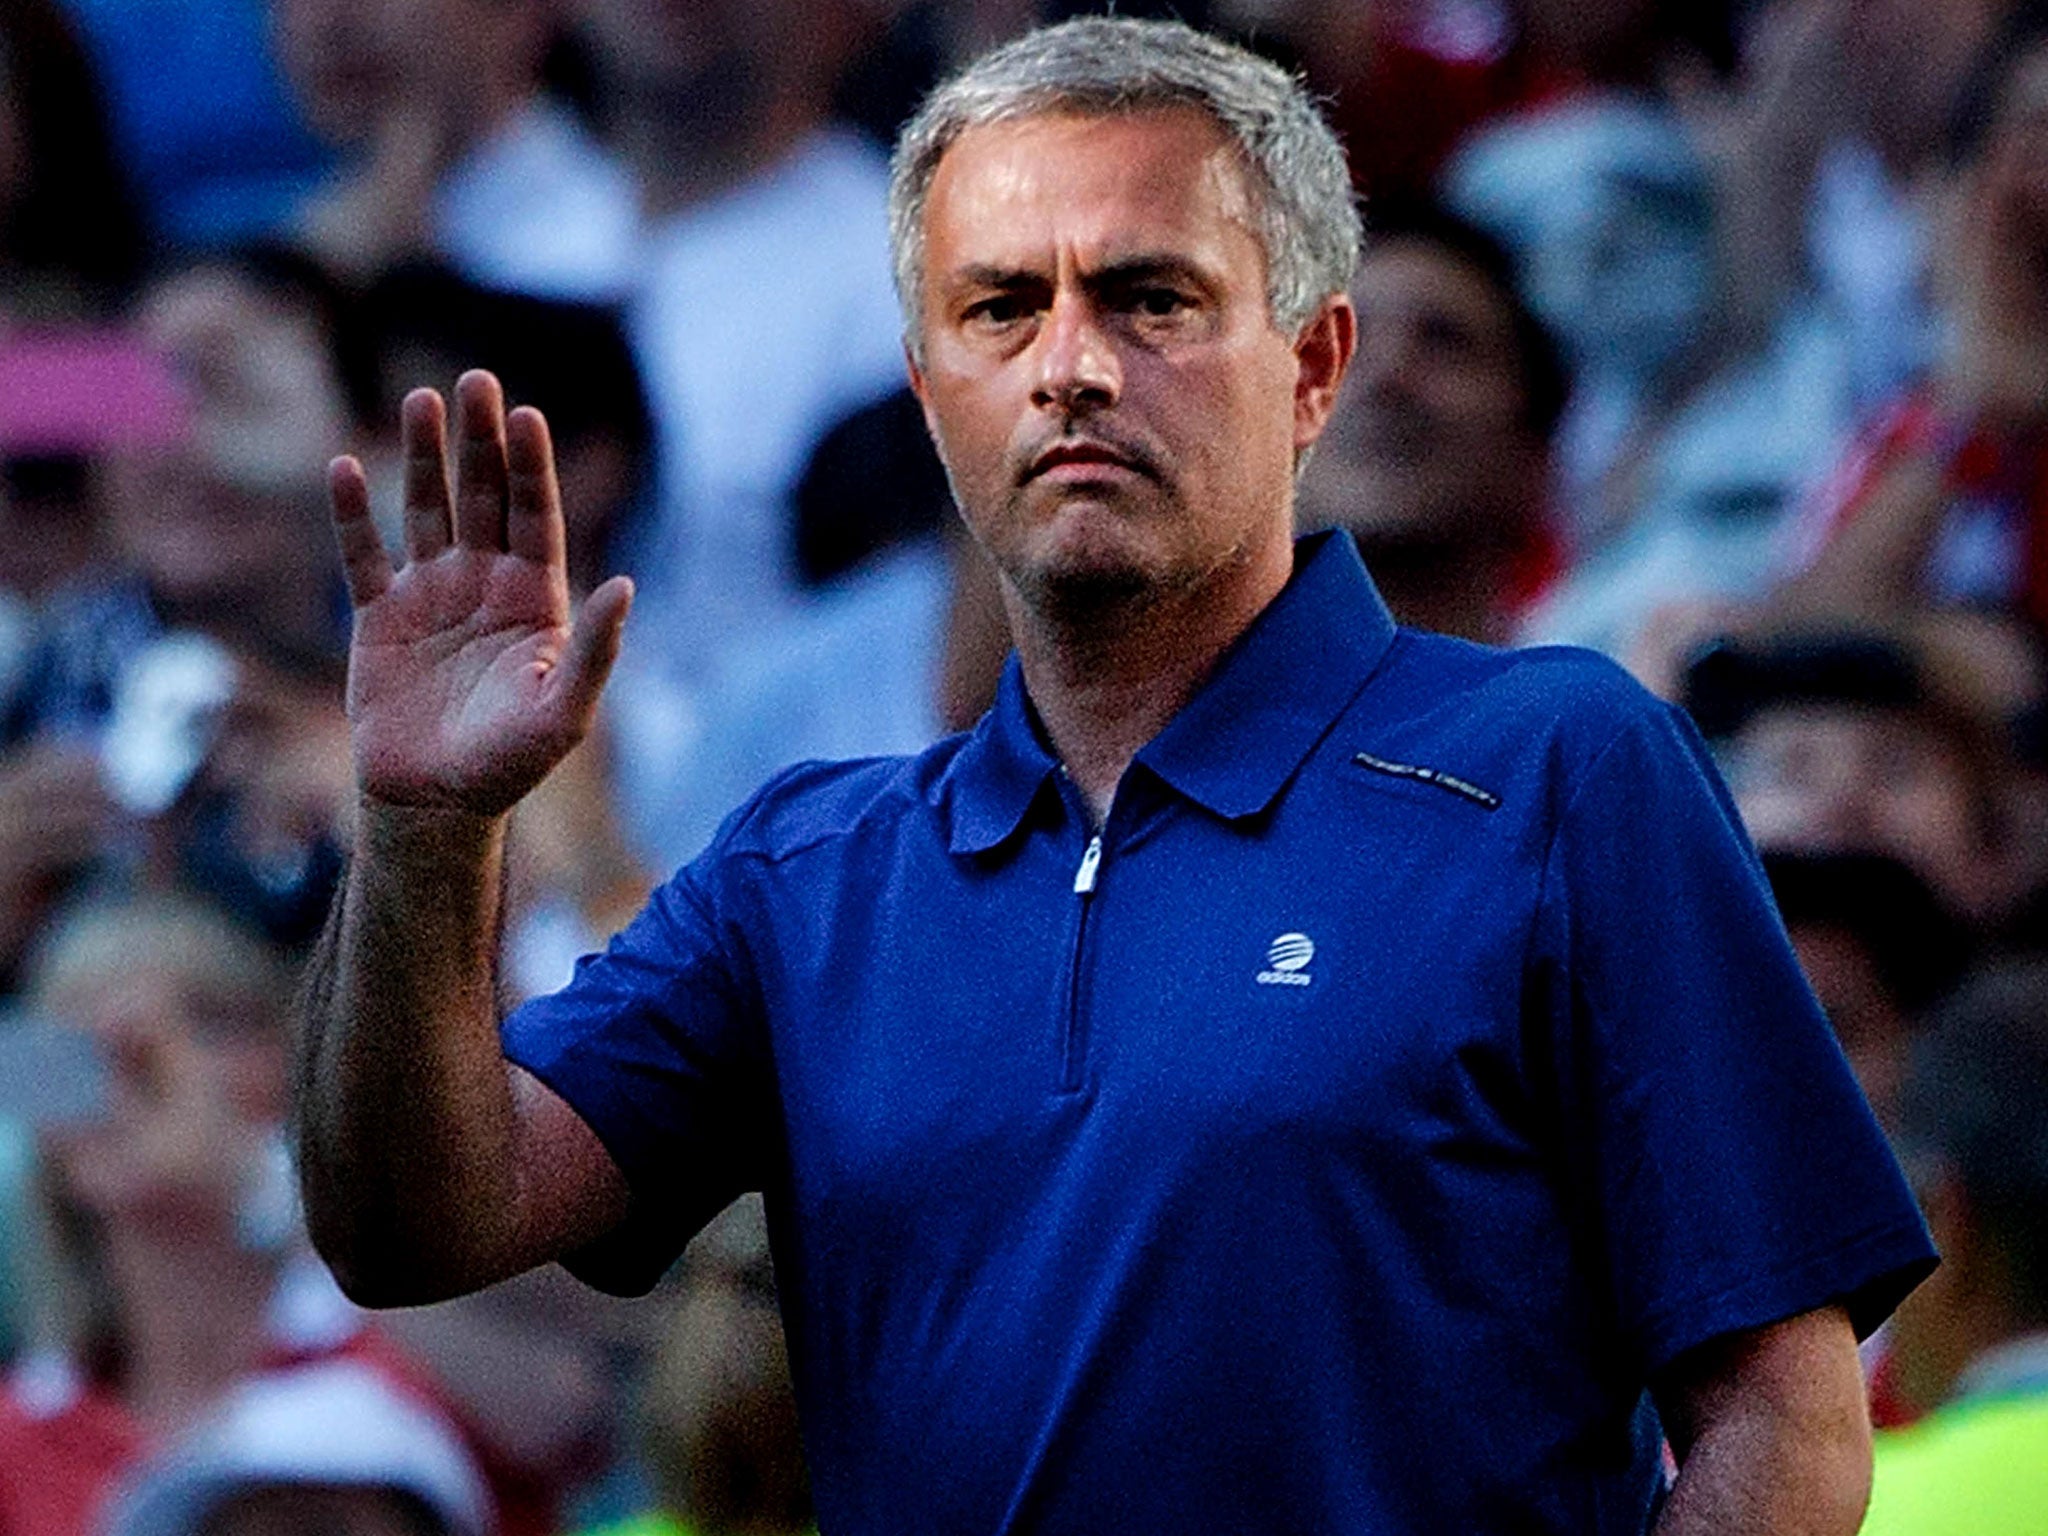 Jose Mourinho waves goodbye to Real Madrid after his last game